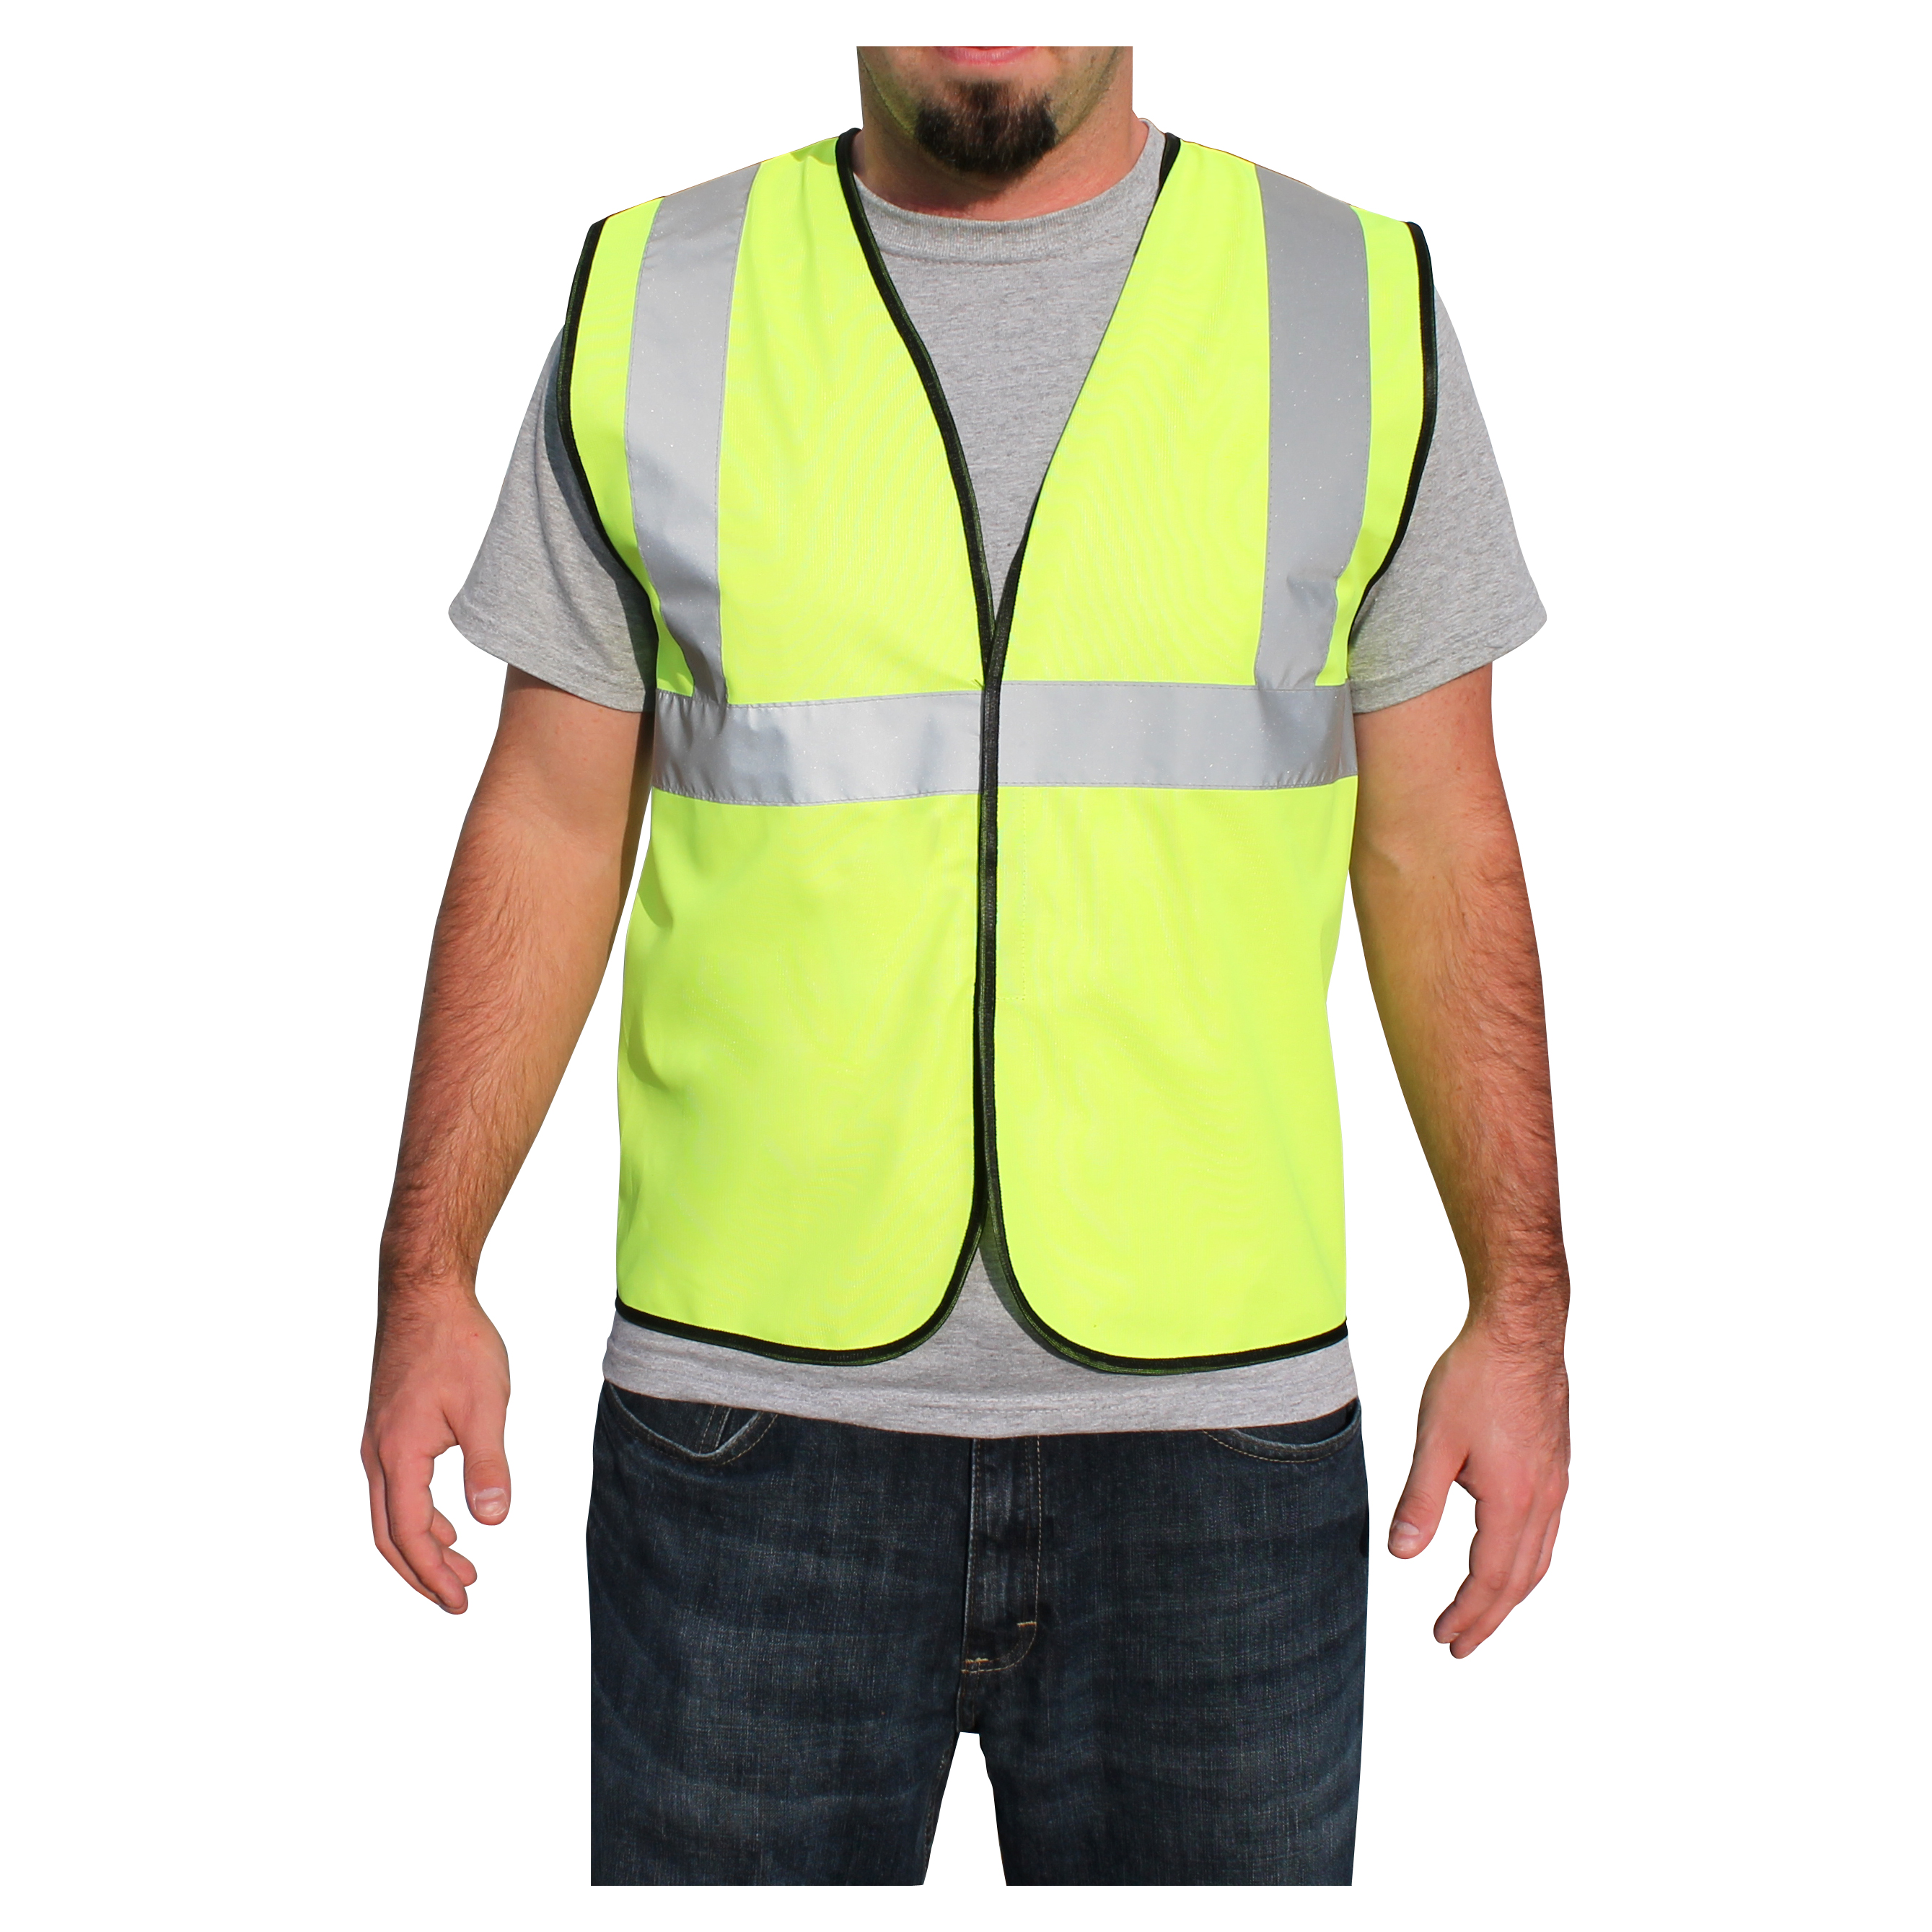 Rugged Blue Type R Class 2 High-Vis Economy Safety Vest